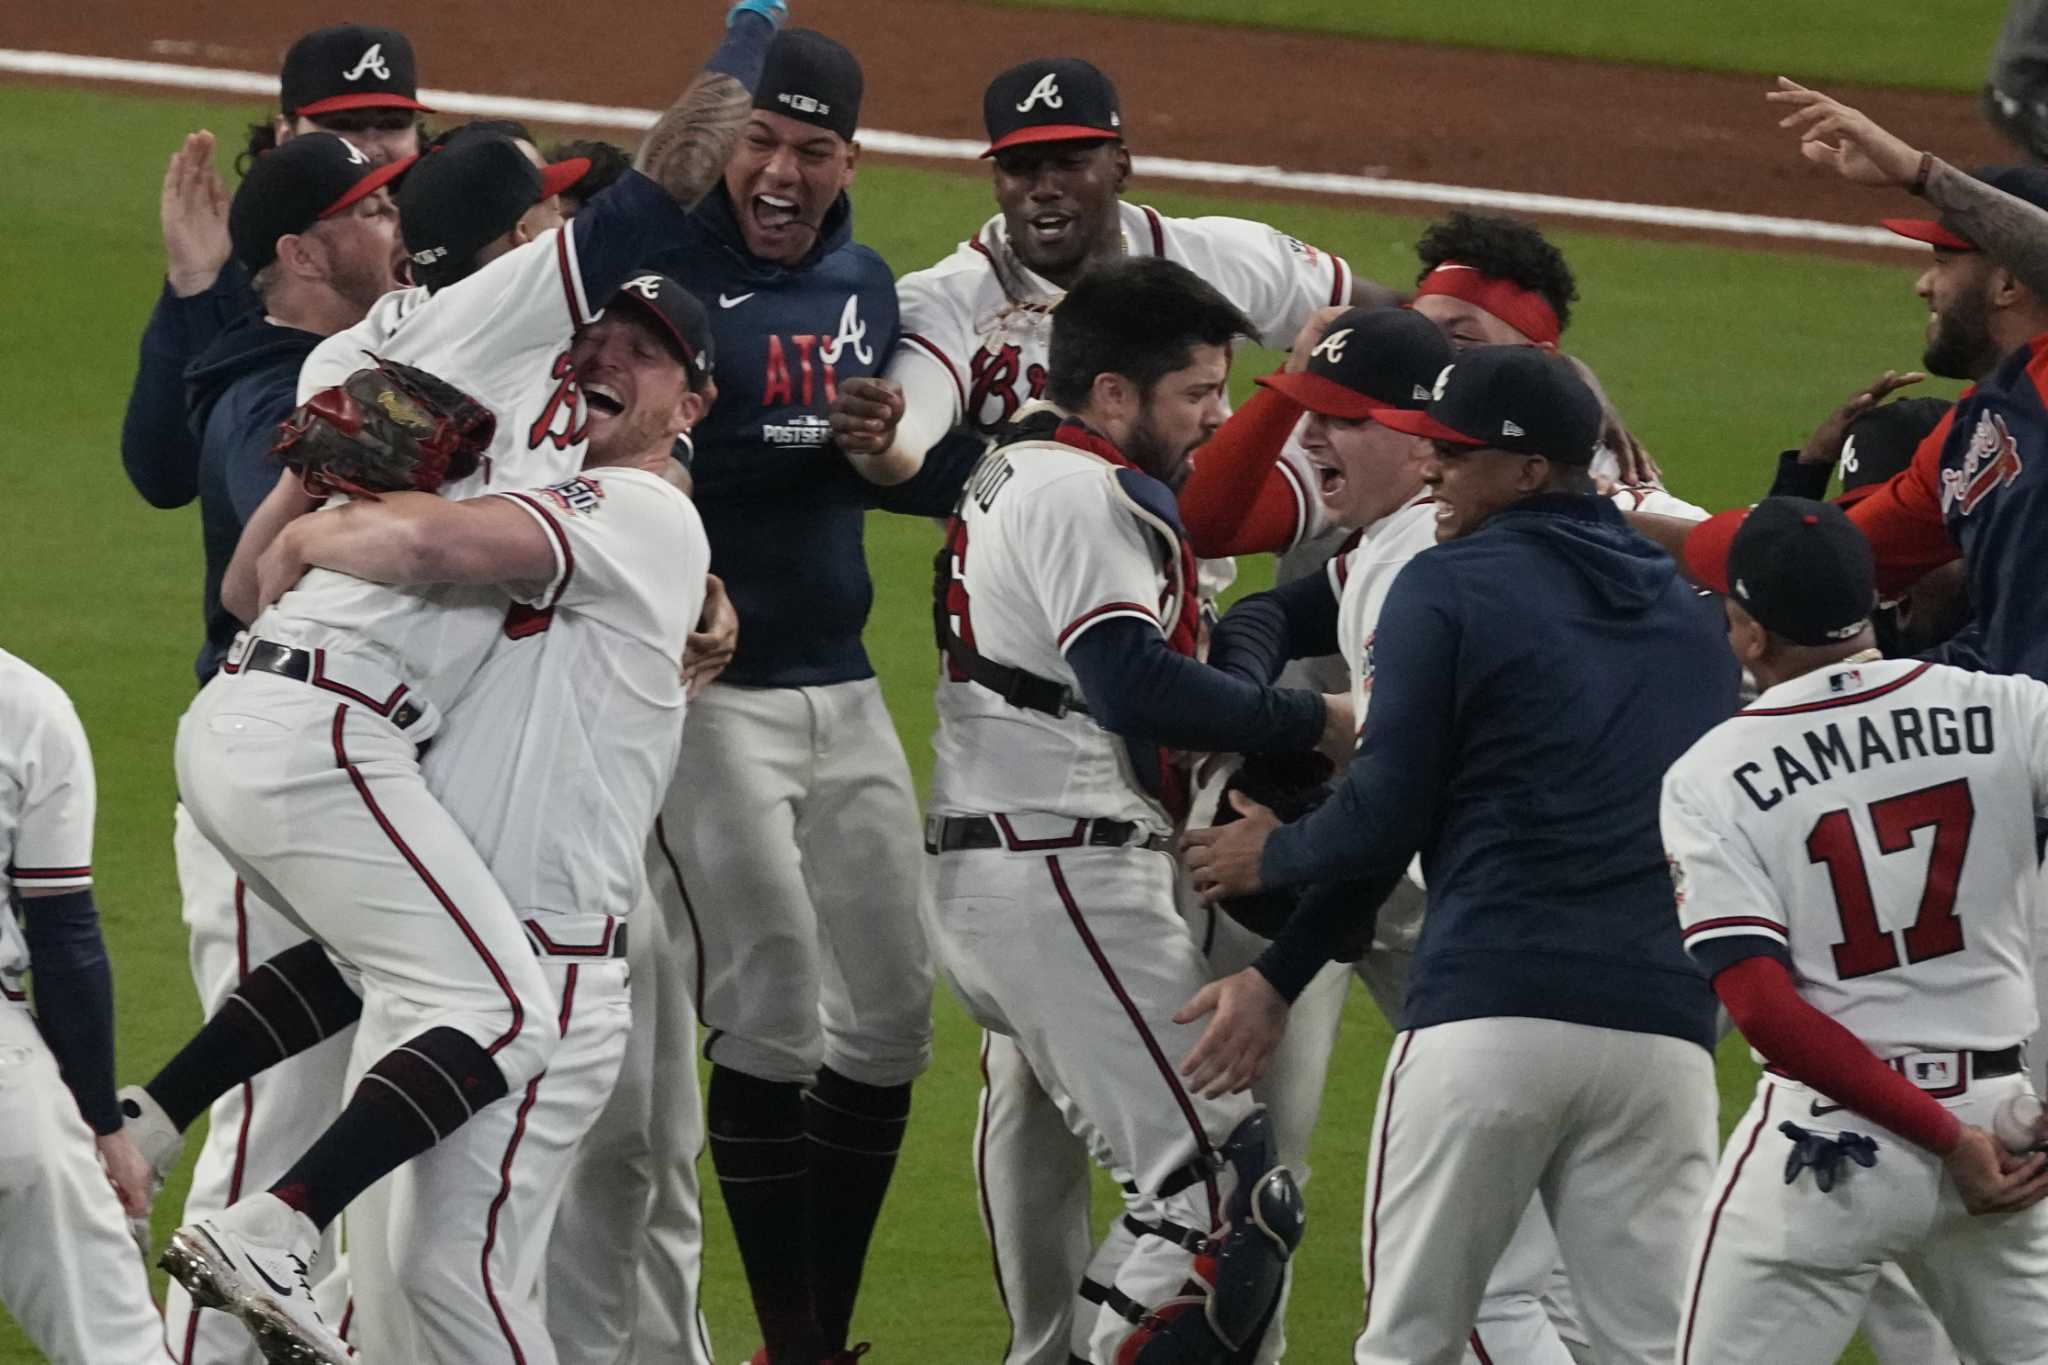 Braves beat Dodgers 4-2, head to first World Series since '99